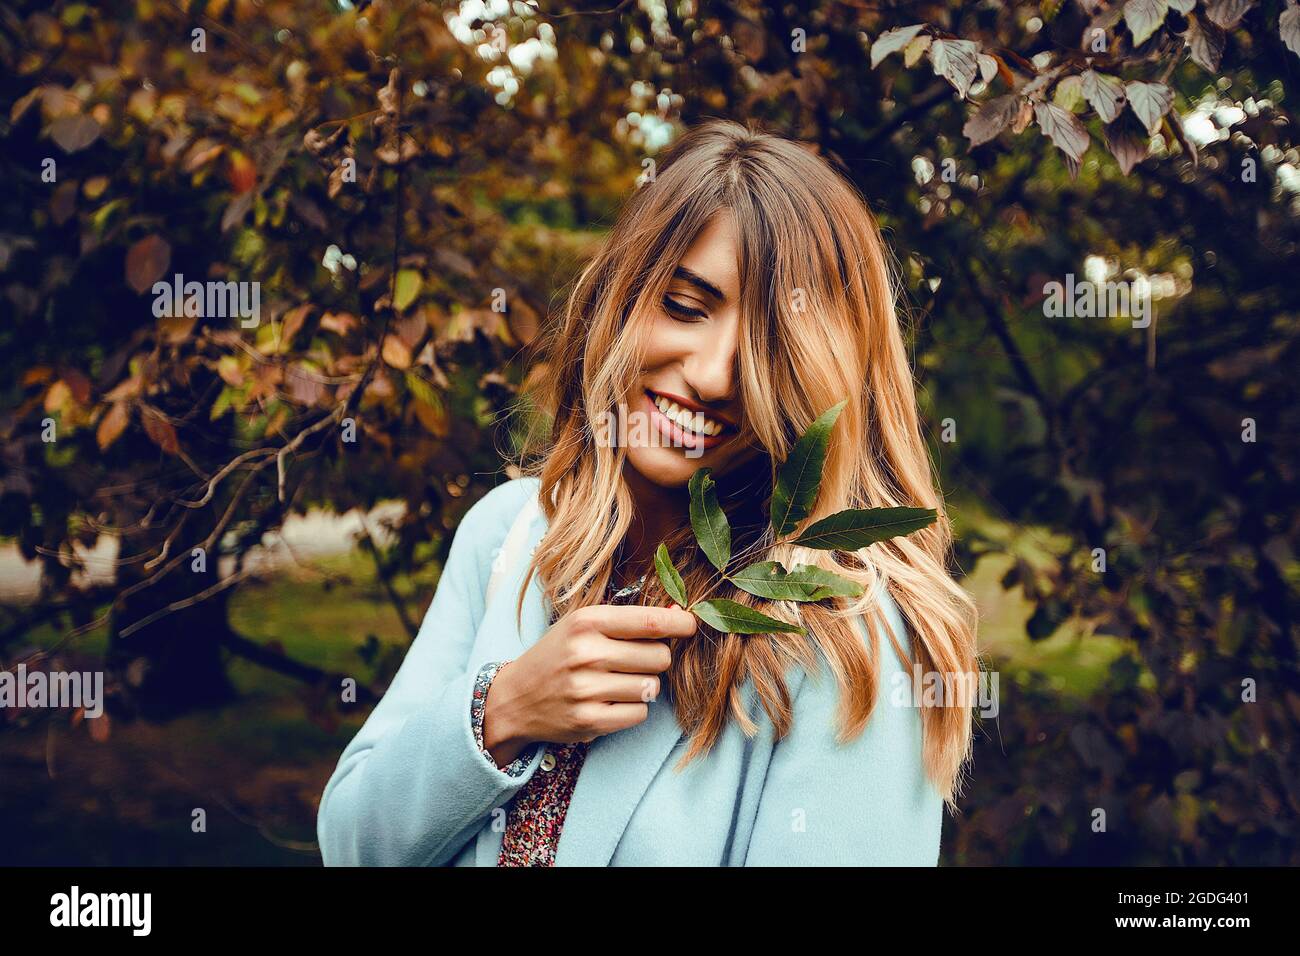 Woman with long blond hair holding sprig of leaves in park, portrait Stock Photo